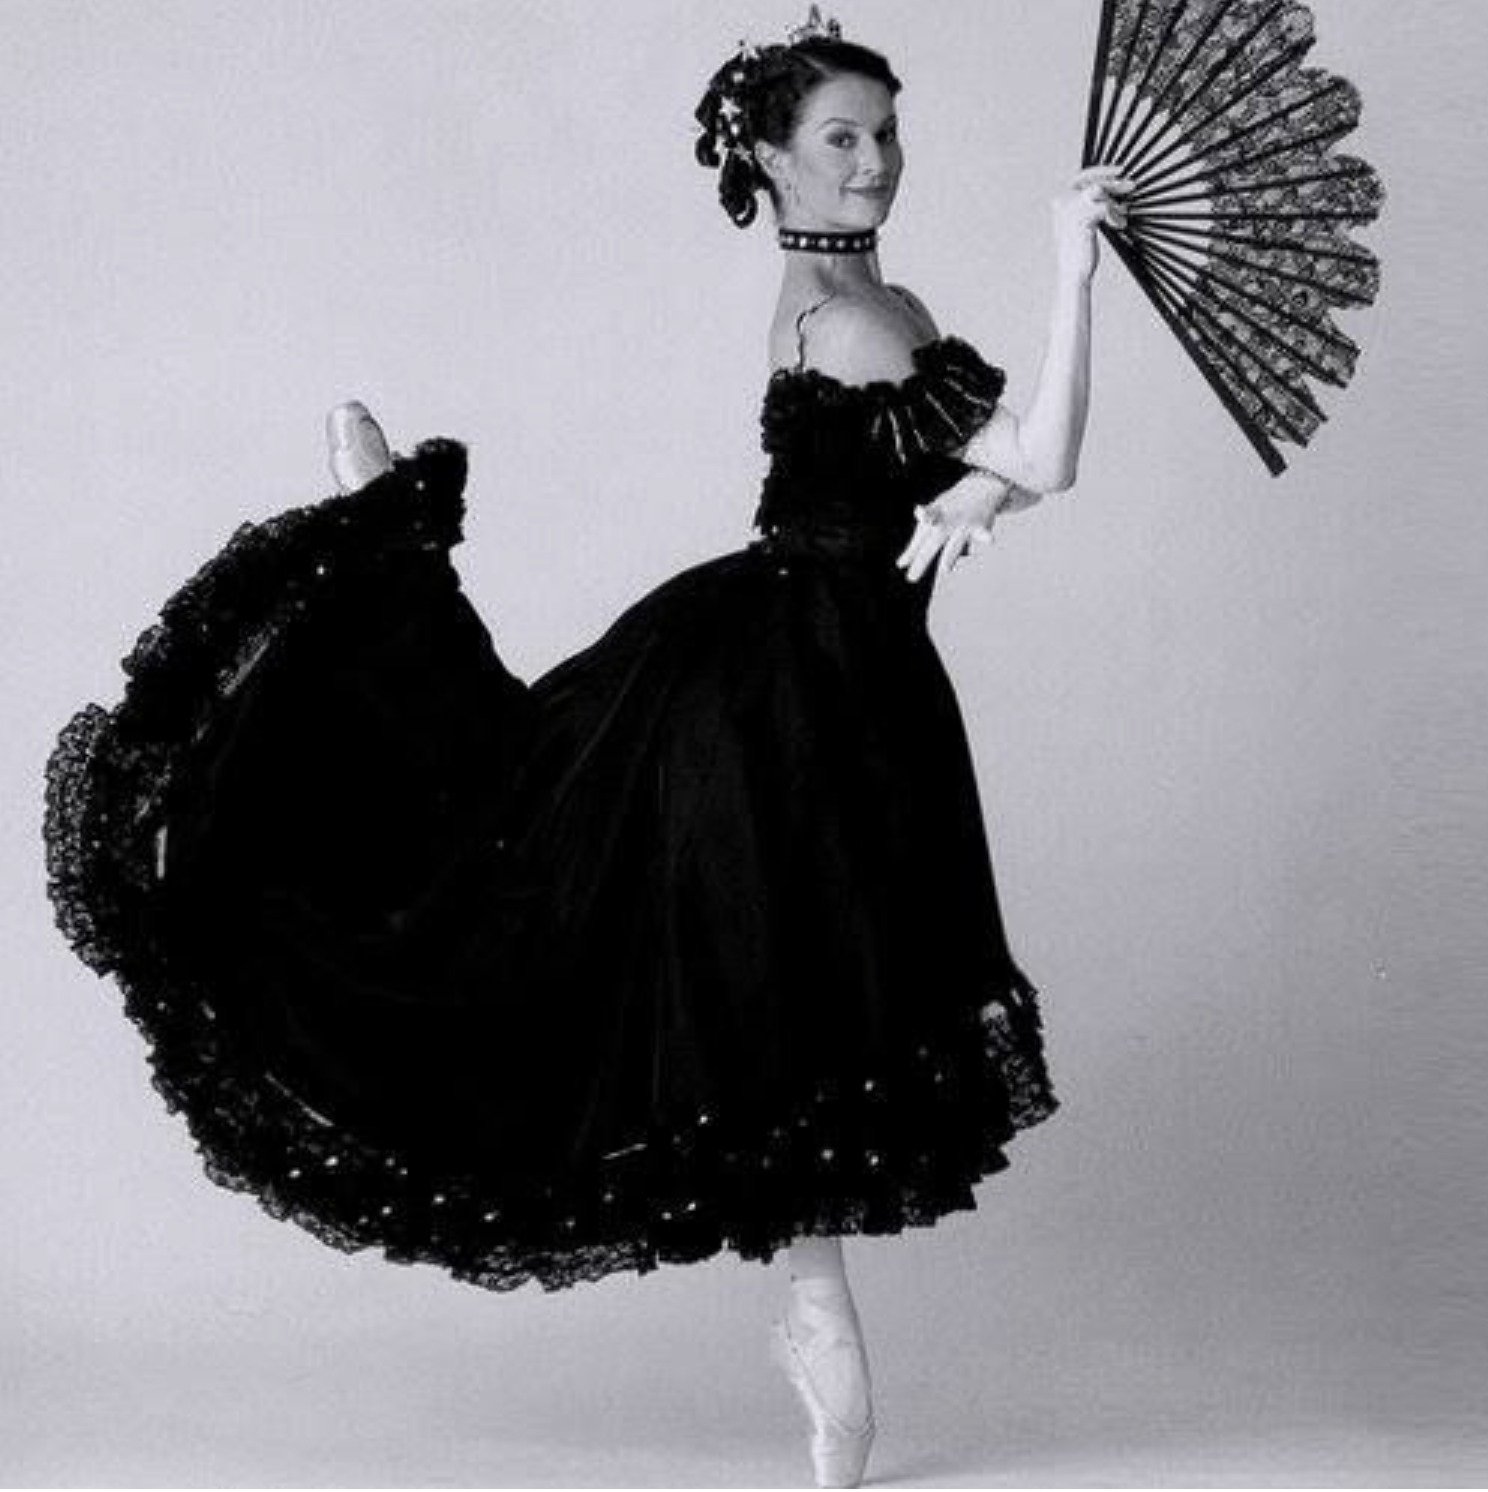  Miranda Coney in The Australian Ballet's The Merry Widow, 2000. Photo by Greg Barrett.This was the ballet after which Charles proposed to Miranda, on 24 October 2000. 